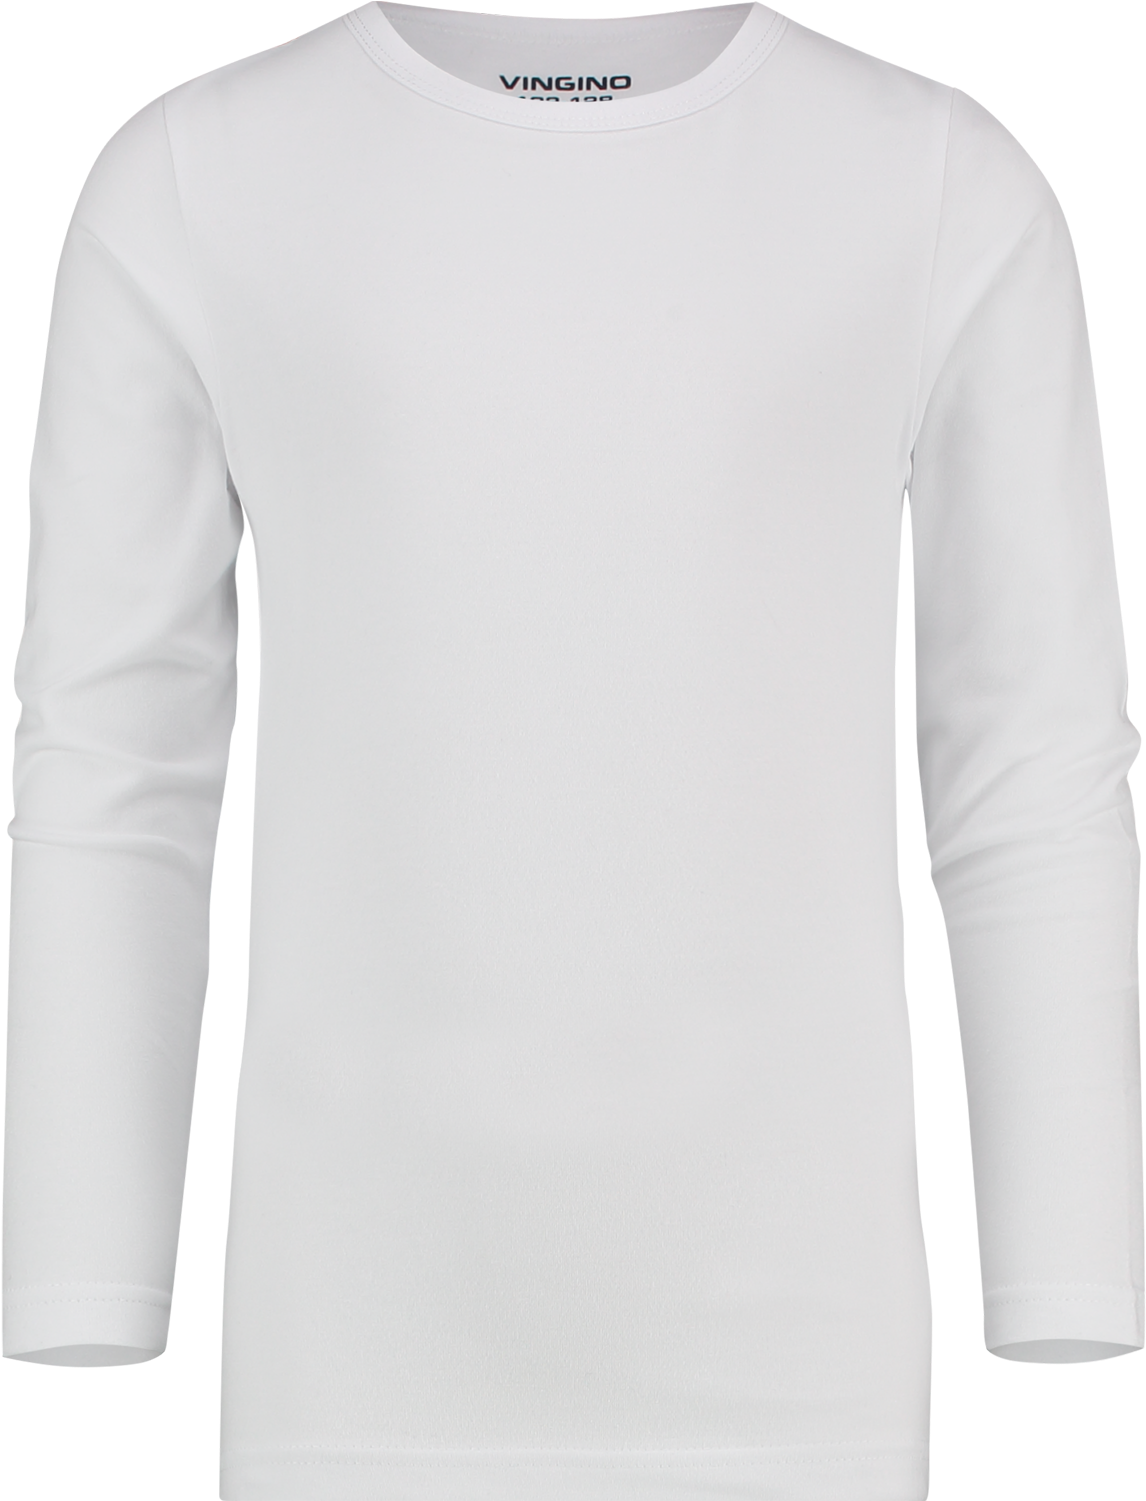 A White Shirt With Long Sleeves